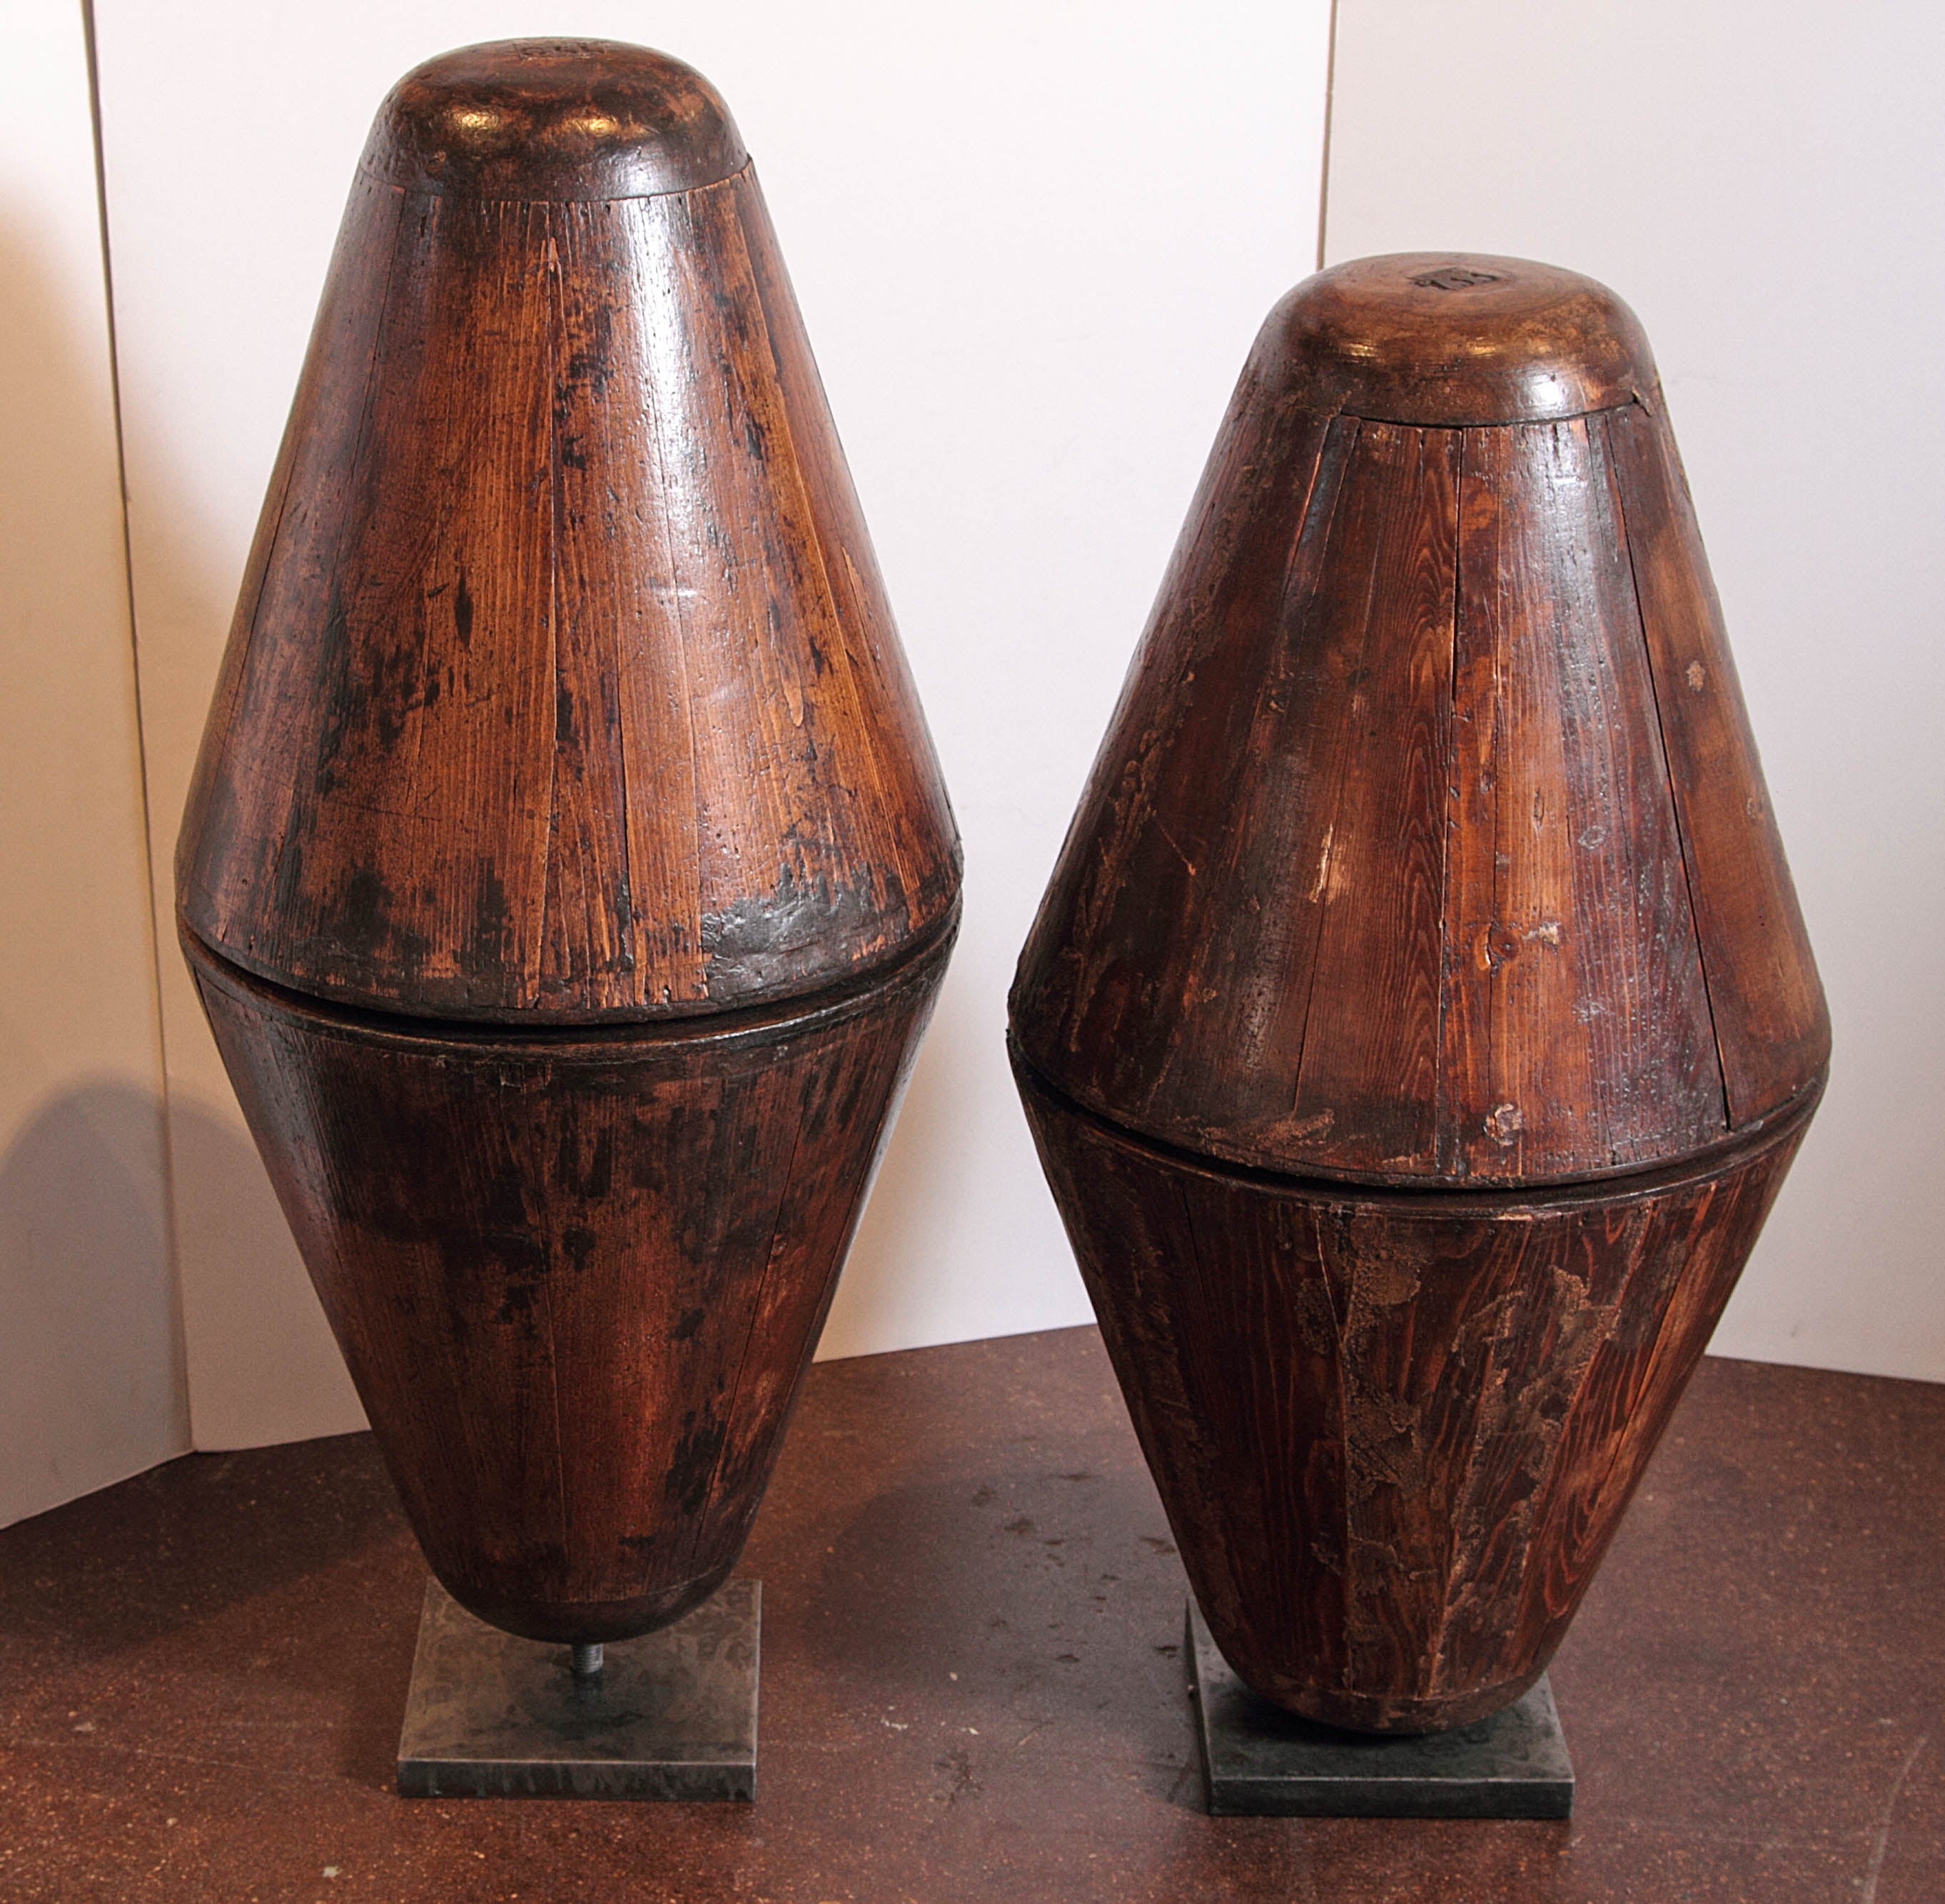 Antique French Hat Molds 
On cast iron stands 
The pine wood is in great condition, and a stunning appeal 
Belonged to a shop in the 1920's in Paris 
These can be creative in the aesthetic of sculpture pieces, large table decor, to simply